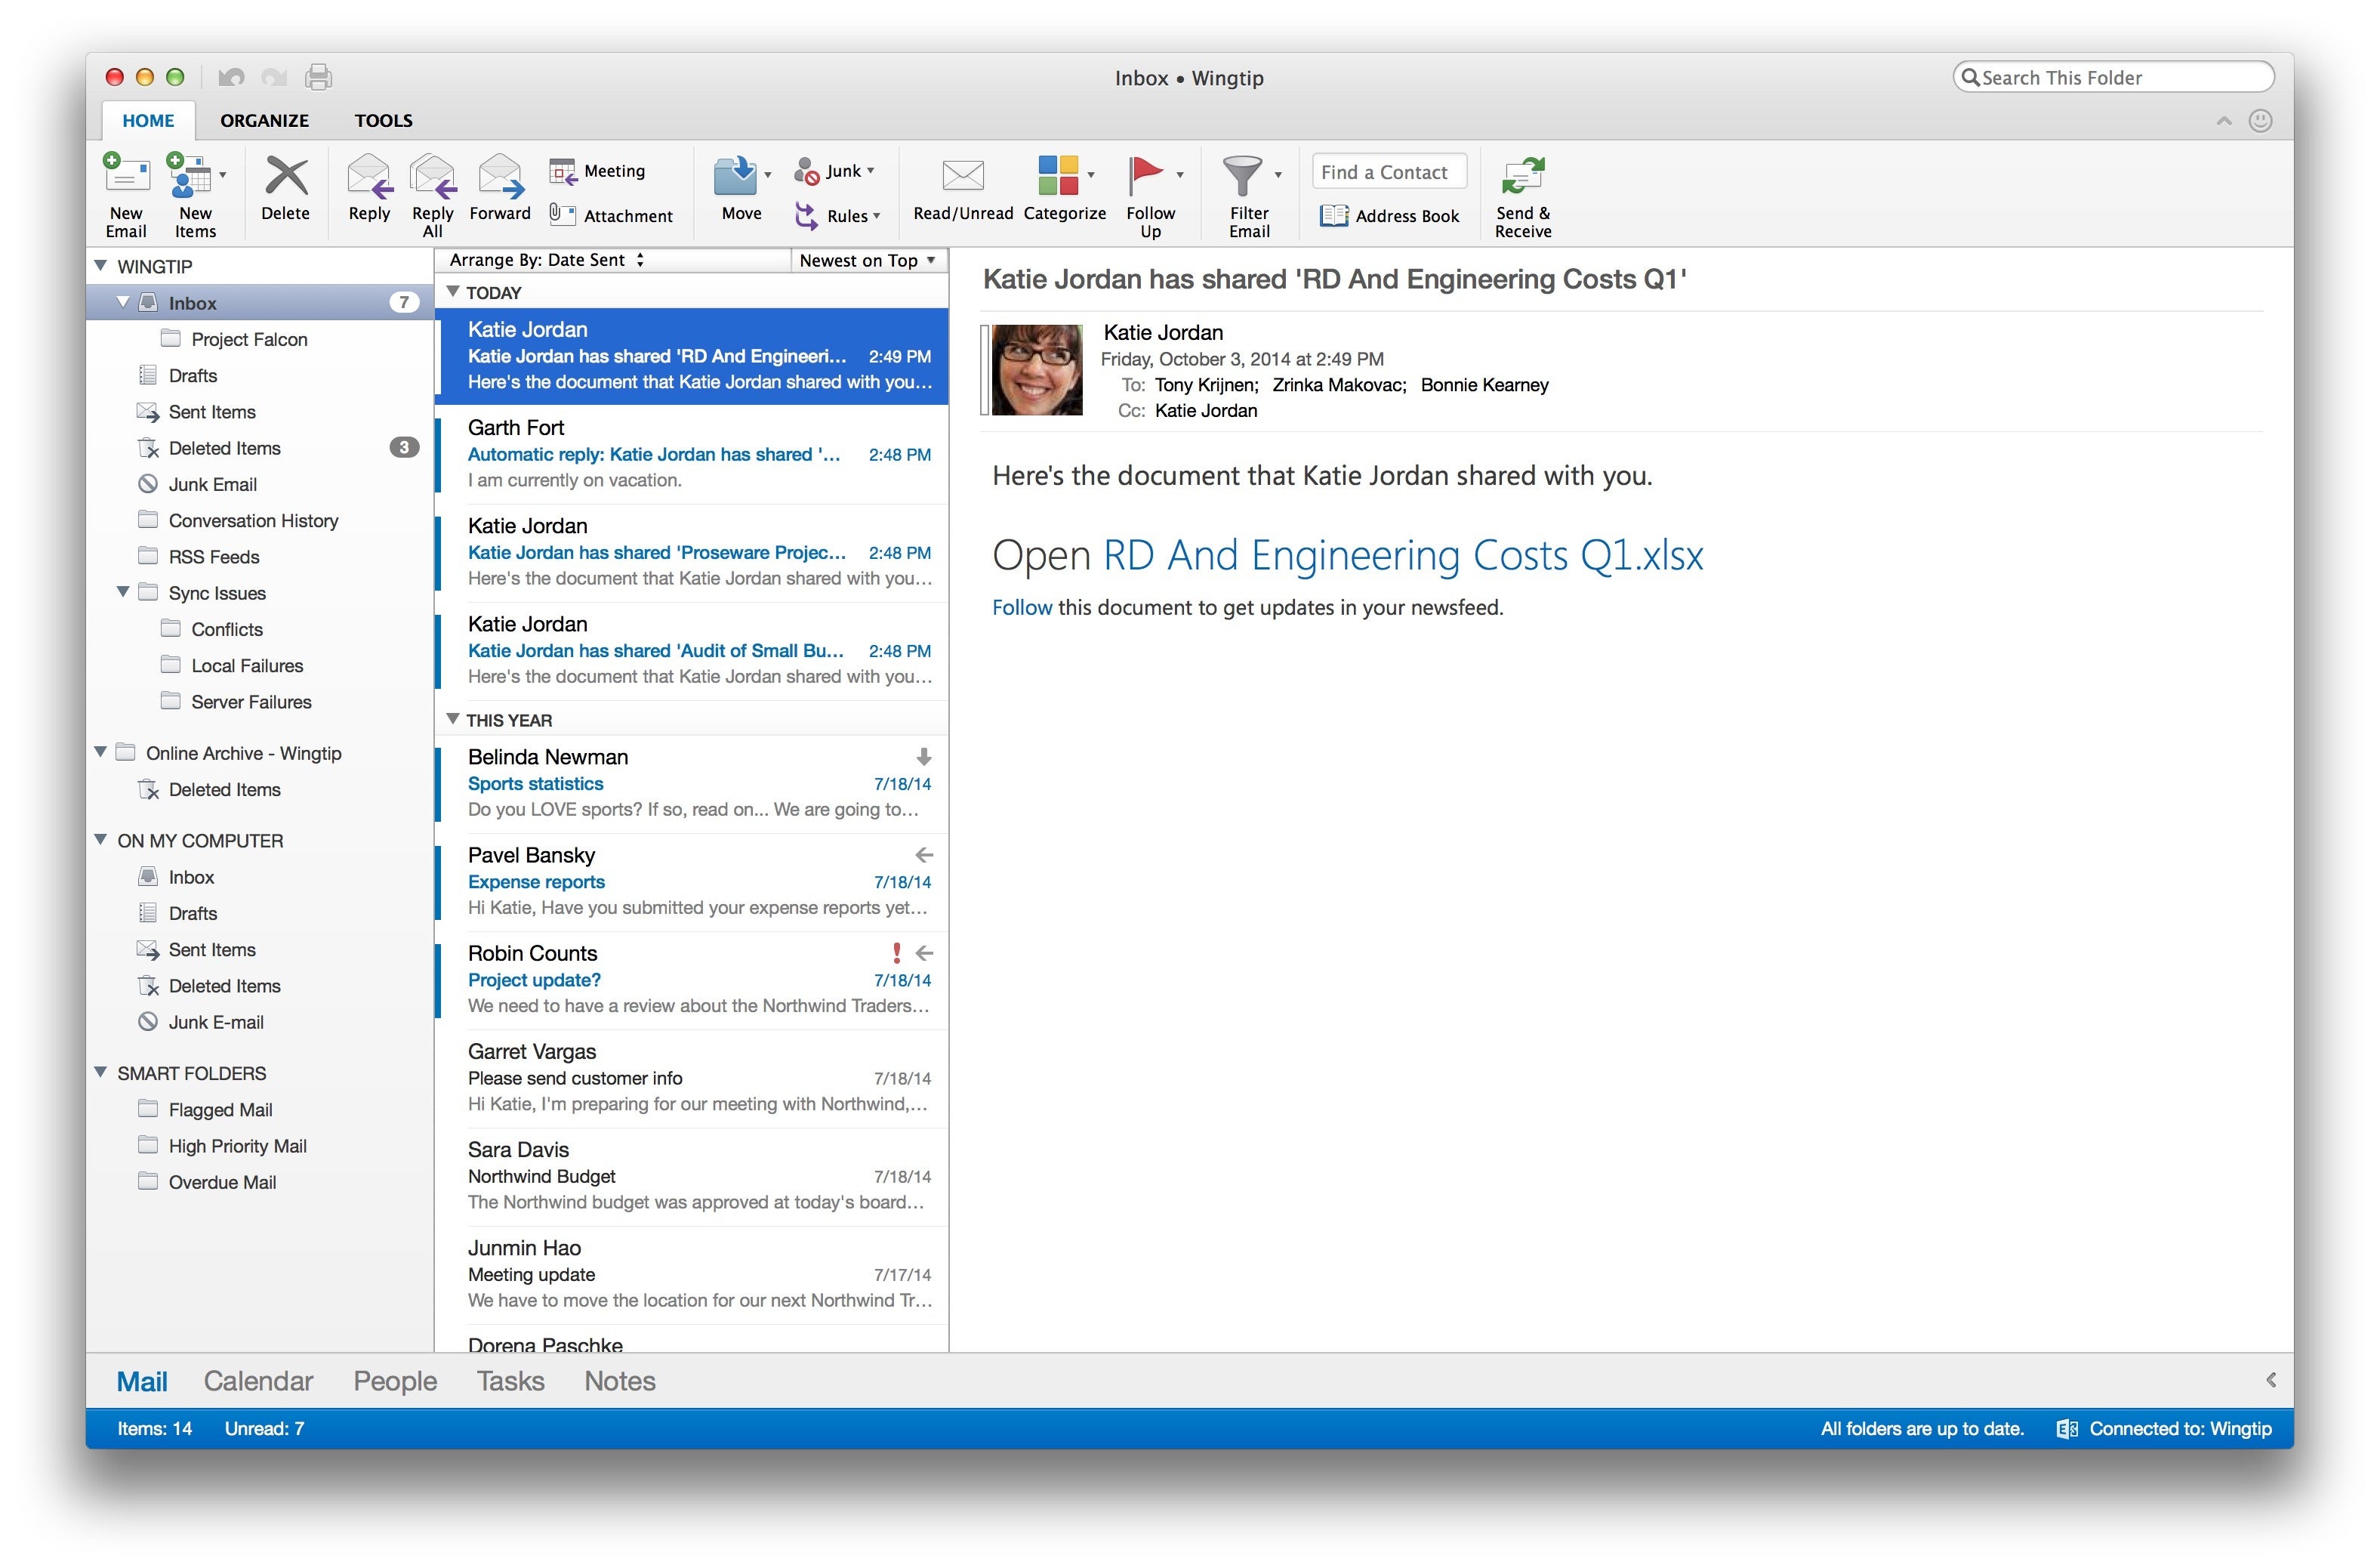 how do you logout of microsoft outlook for mac 2011?